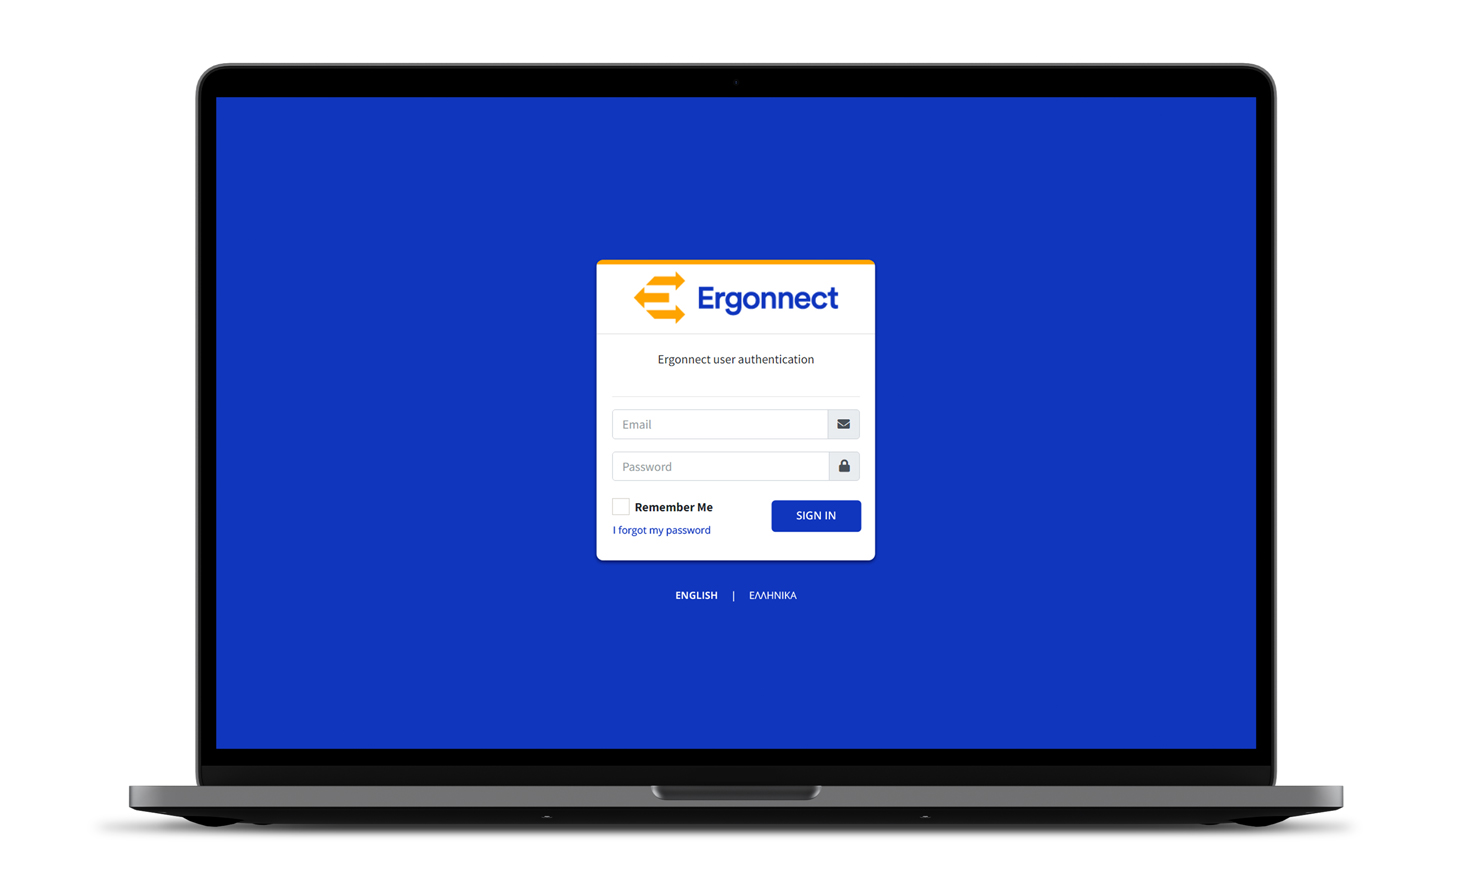 The login screen for the Ergonnect application WEB-BASED SOFTWARE